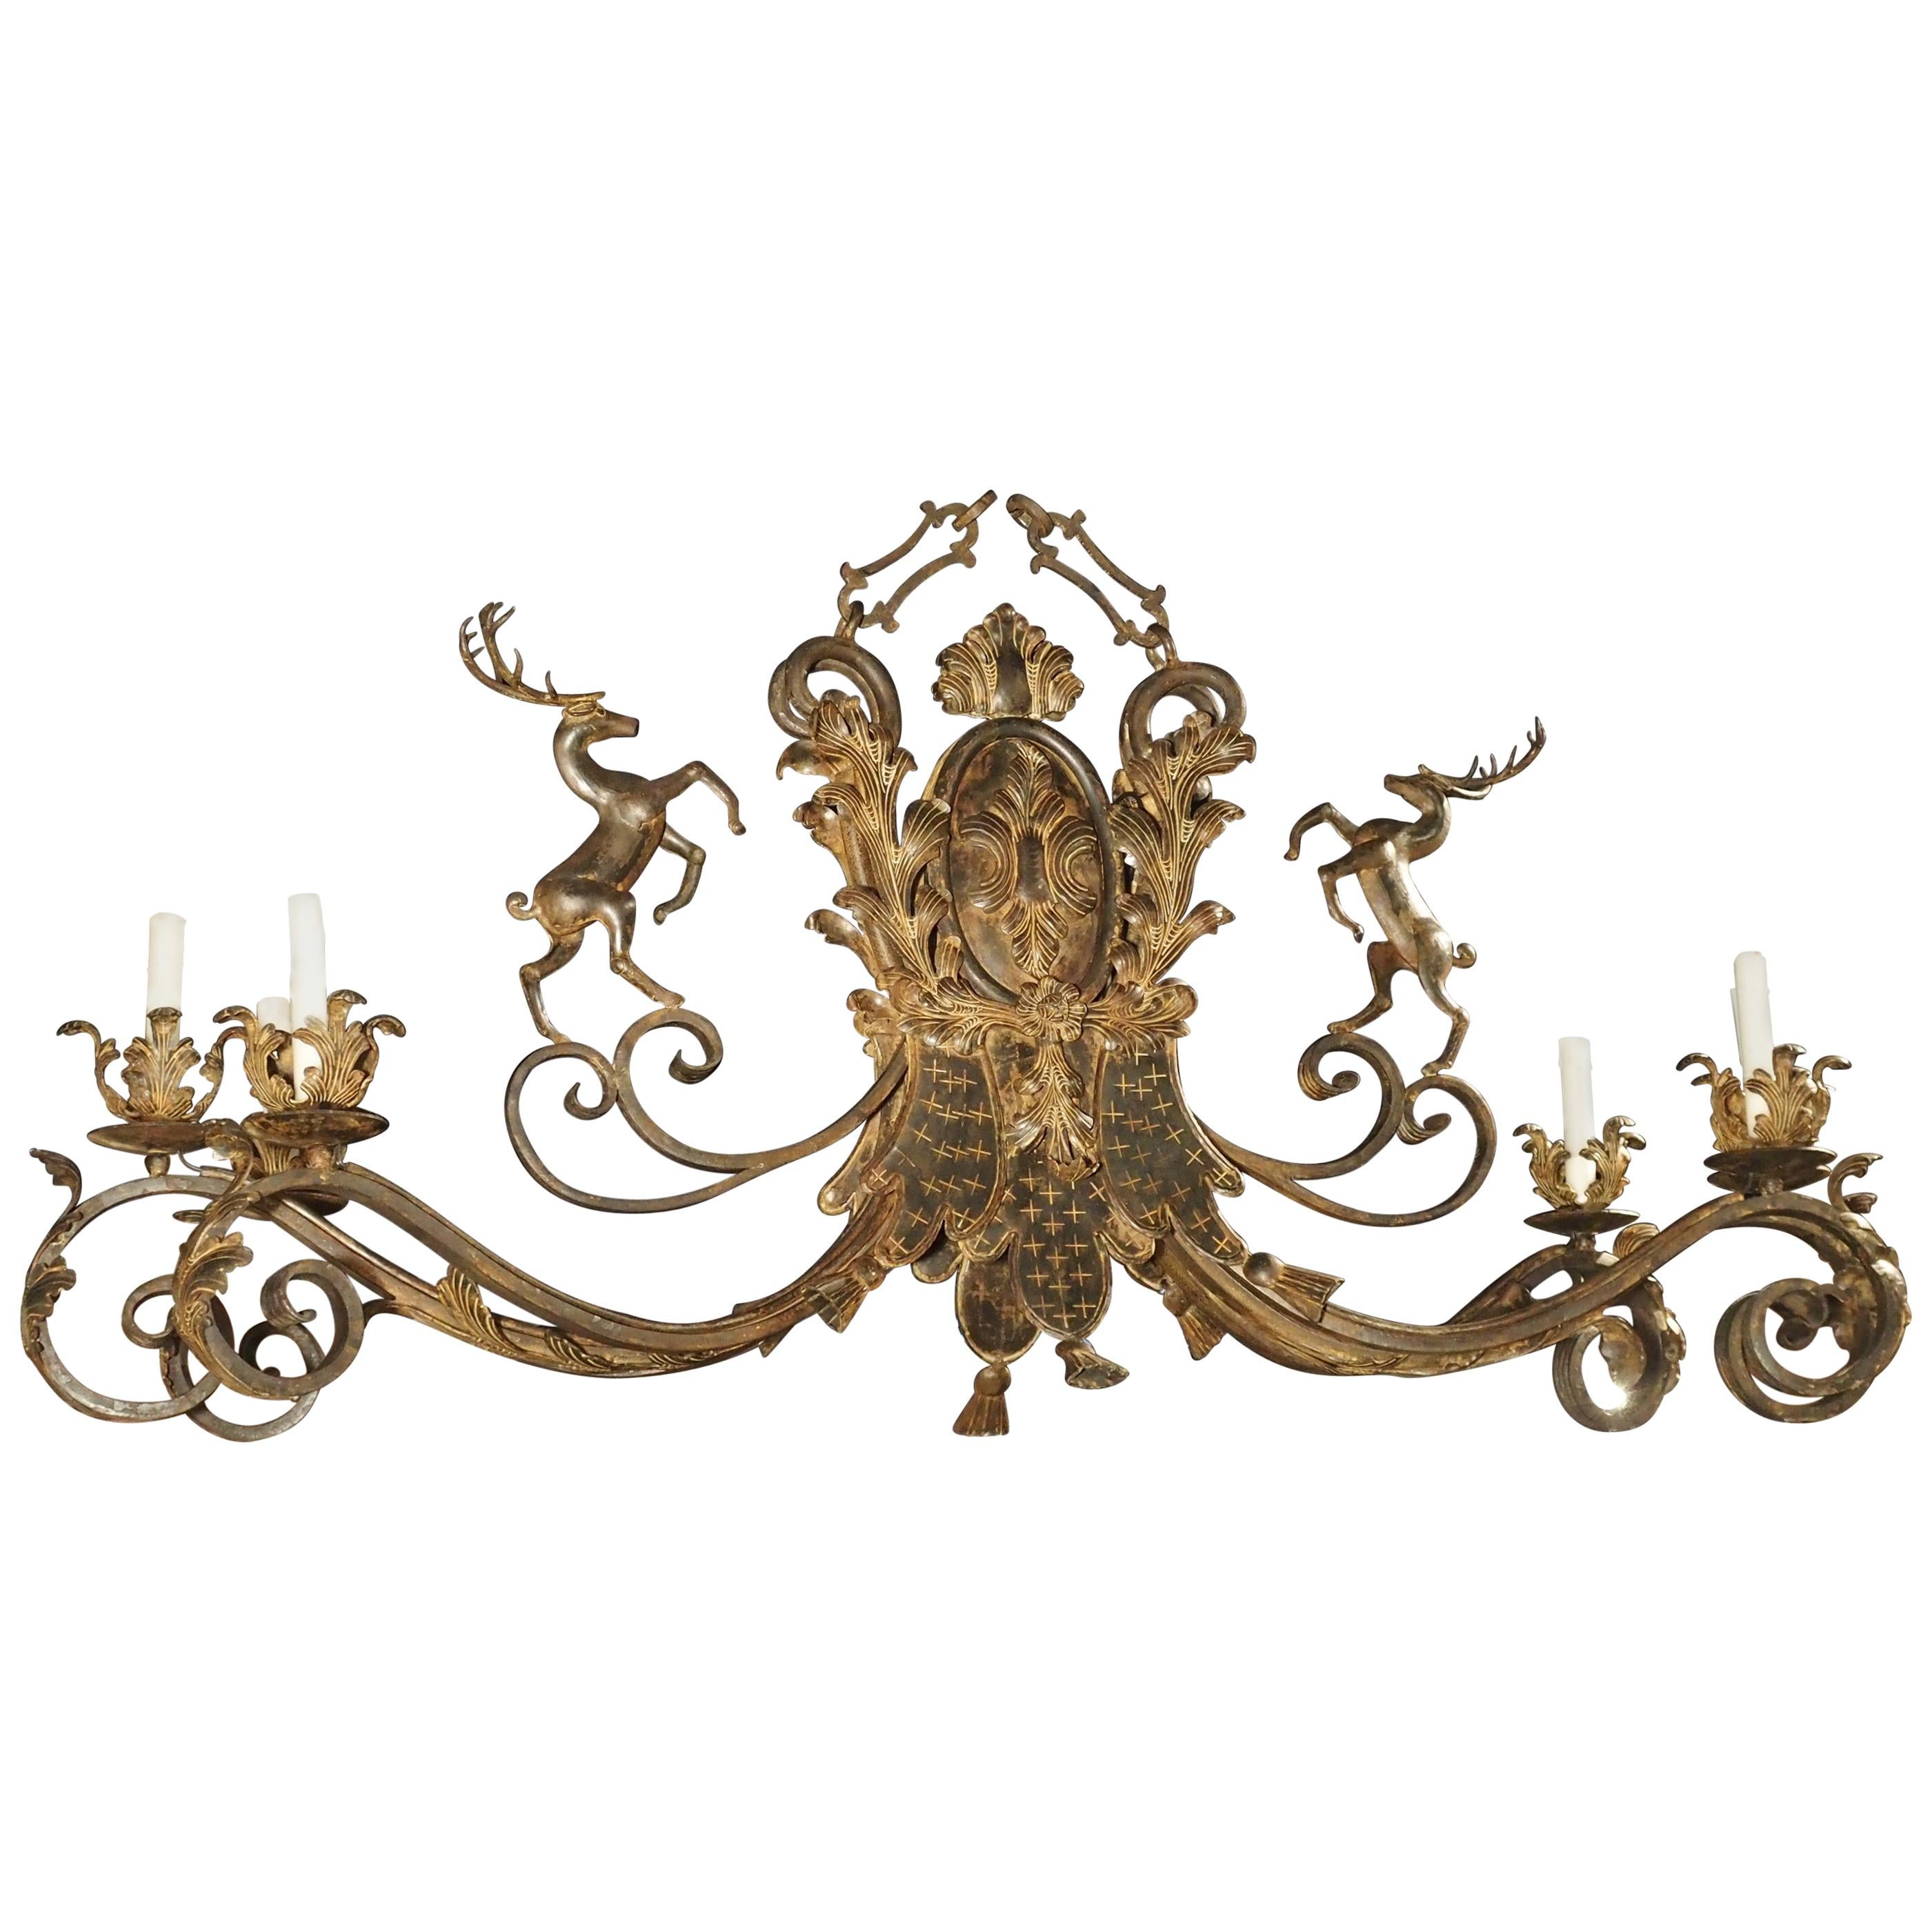 Large Polychrome Wrought Iron Stags Chandelier from France, 1900s